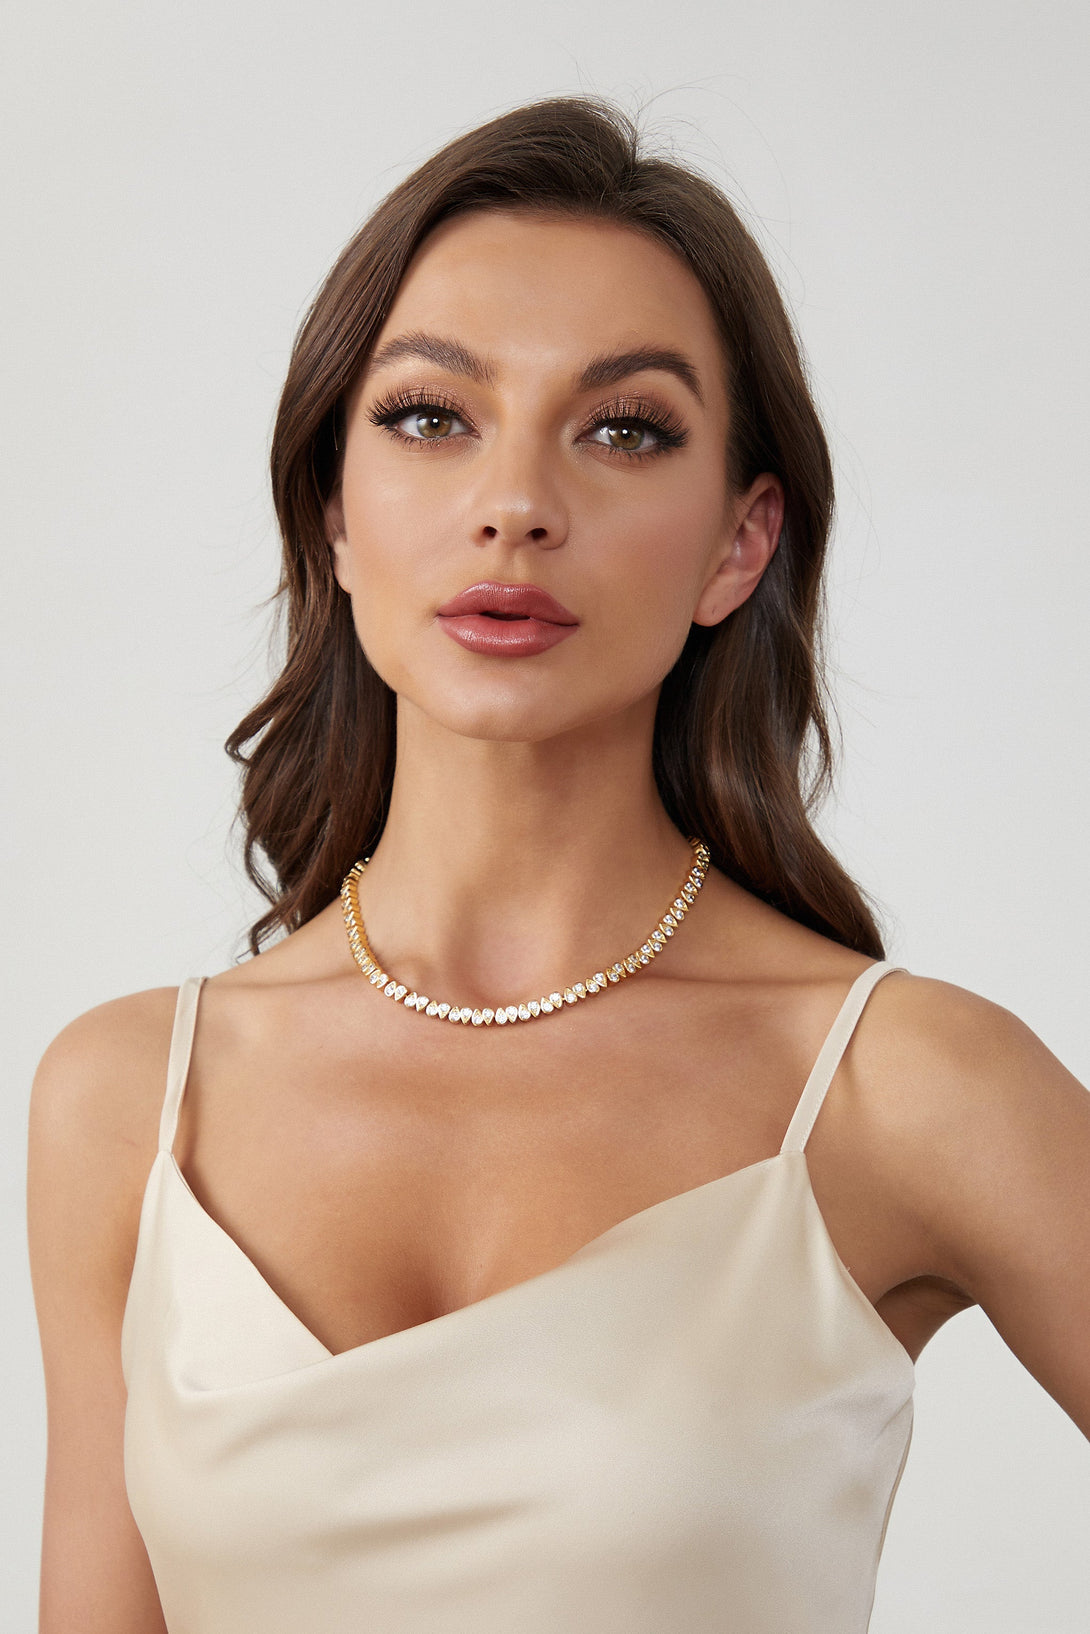 Gold Tear Shaped Zirconia Tennis Choker Necklace - Classicharms